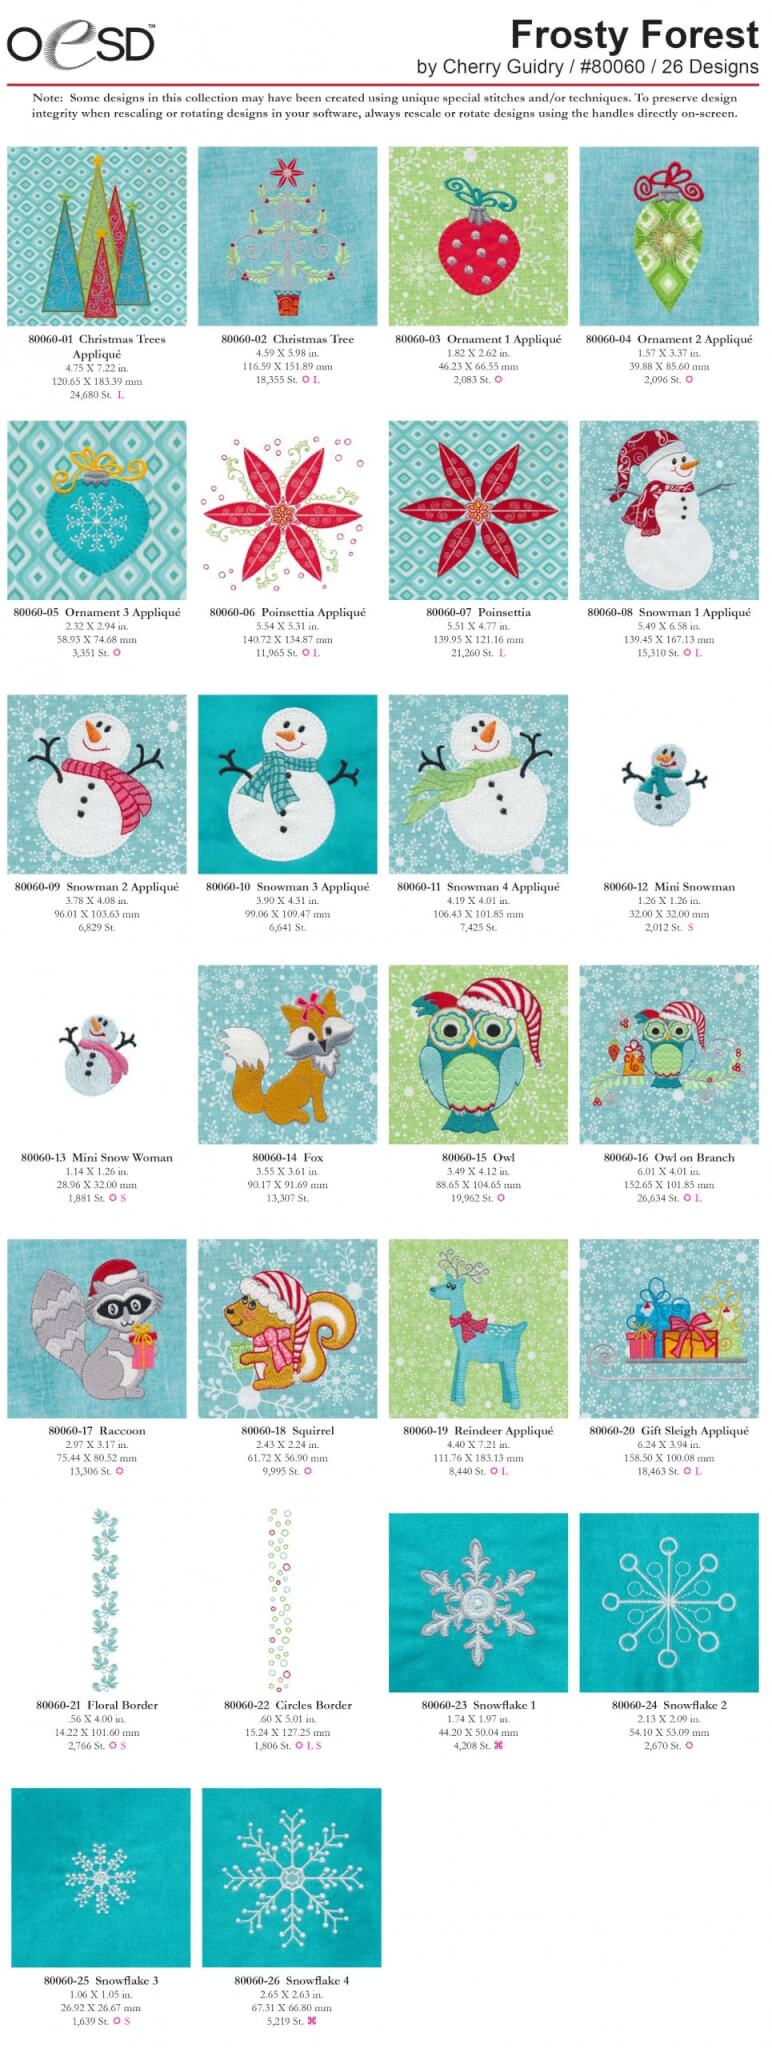 Frosty Forest OESD #80060 Embroidery Designs at Nancy Zieman Productions at ShopNZP.com